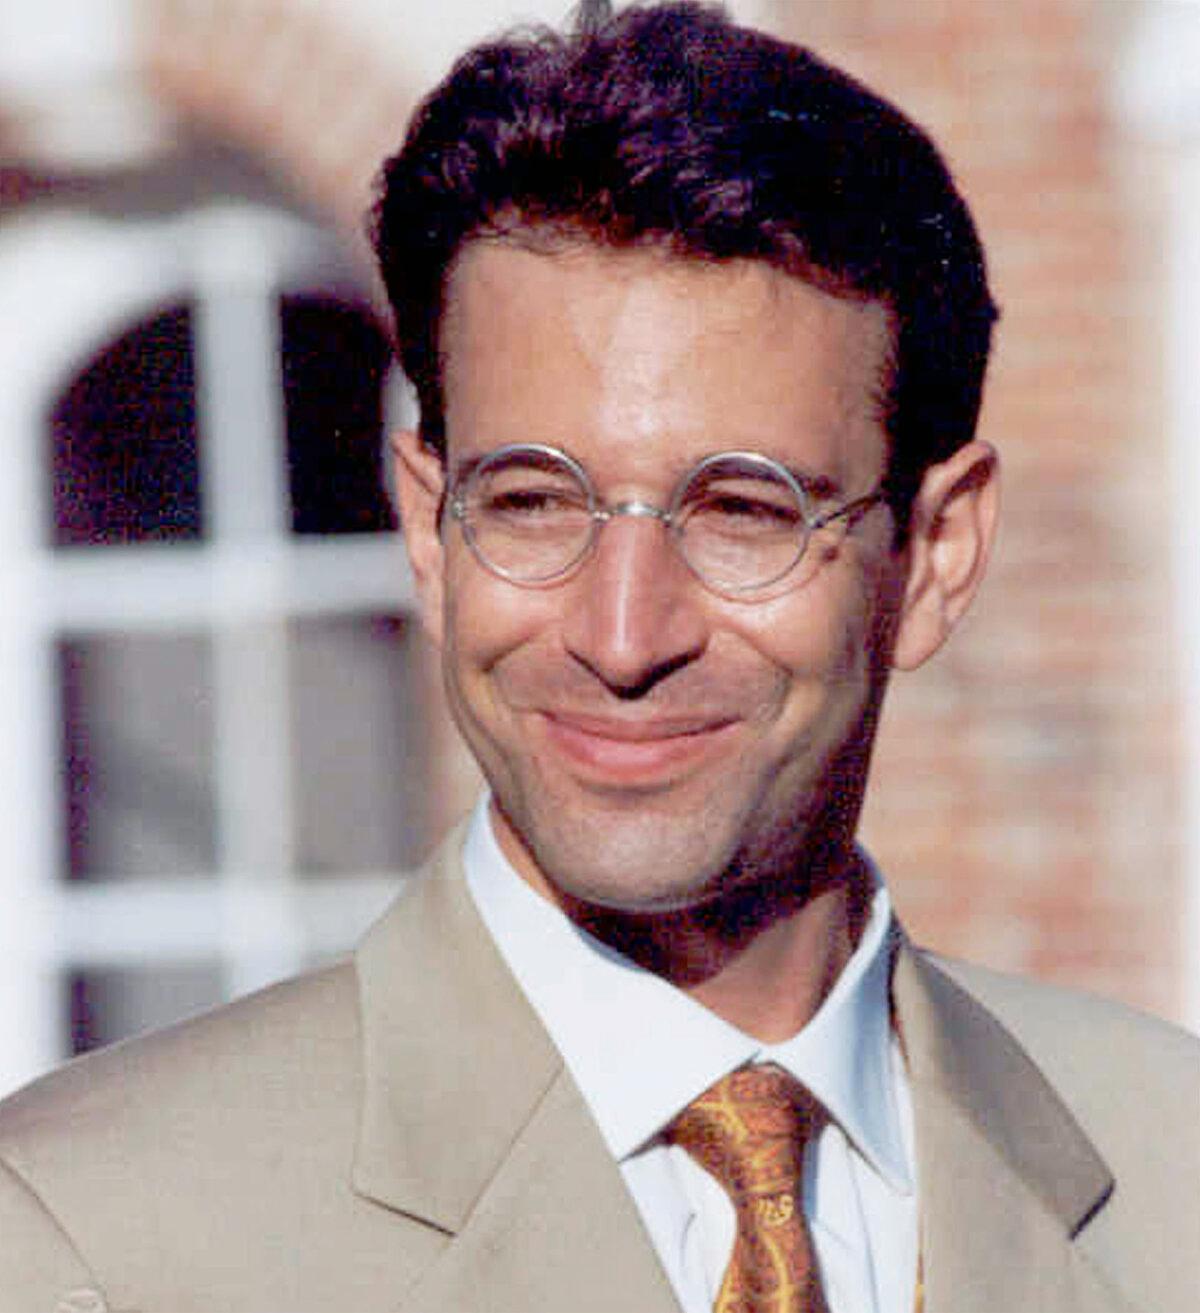 Daniel Pearl, a Wall Street Journal newspaper reporter kidnapped and murdered by Islamic extremists in Karachi, Pakistan, in a file photo. (Getty Images)